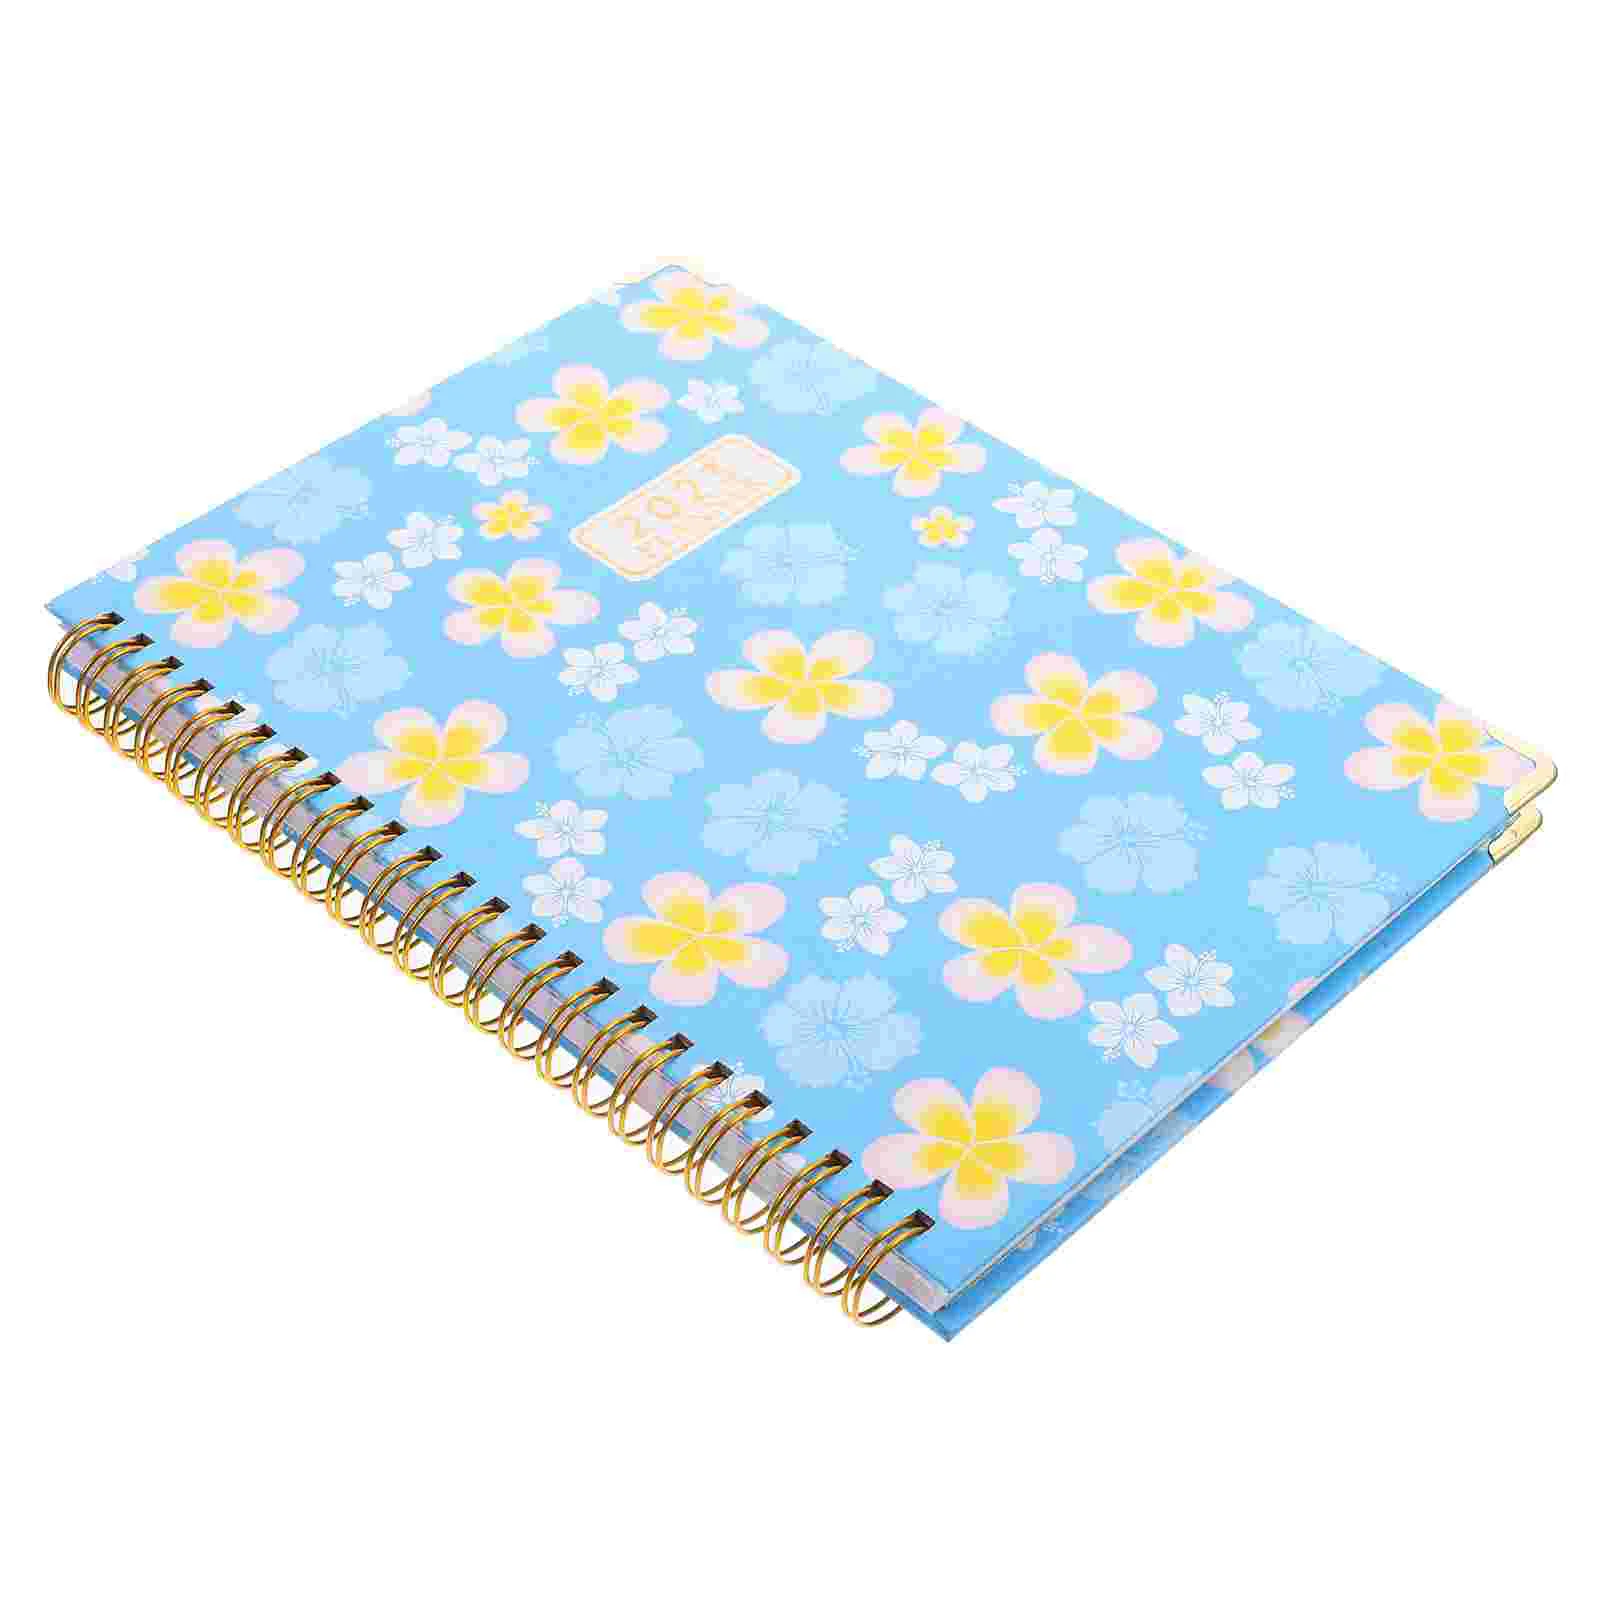 

Planner Notebook Daily List Calendar Monthly Office Book Notepads Do Notepad Writing Supplies Memo Journal Weekly Planning